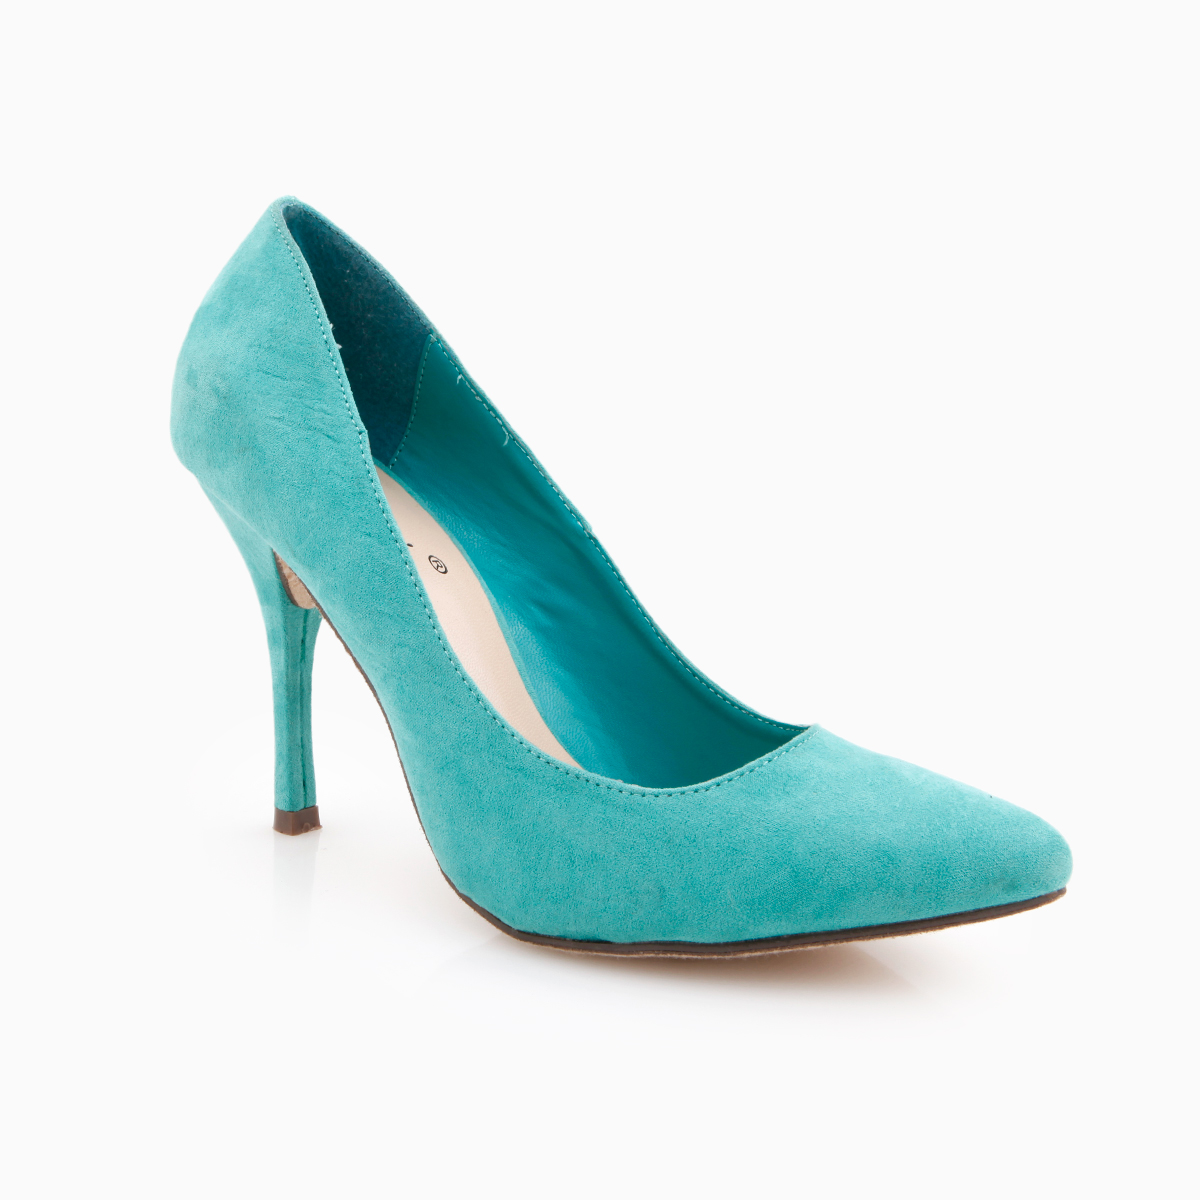 Kitten Pointed Toe Pumps in Turquoise | DAILYLOOK